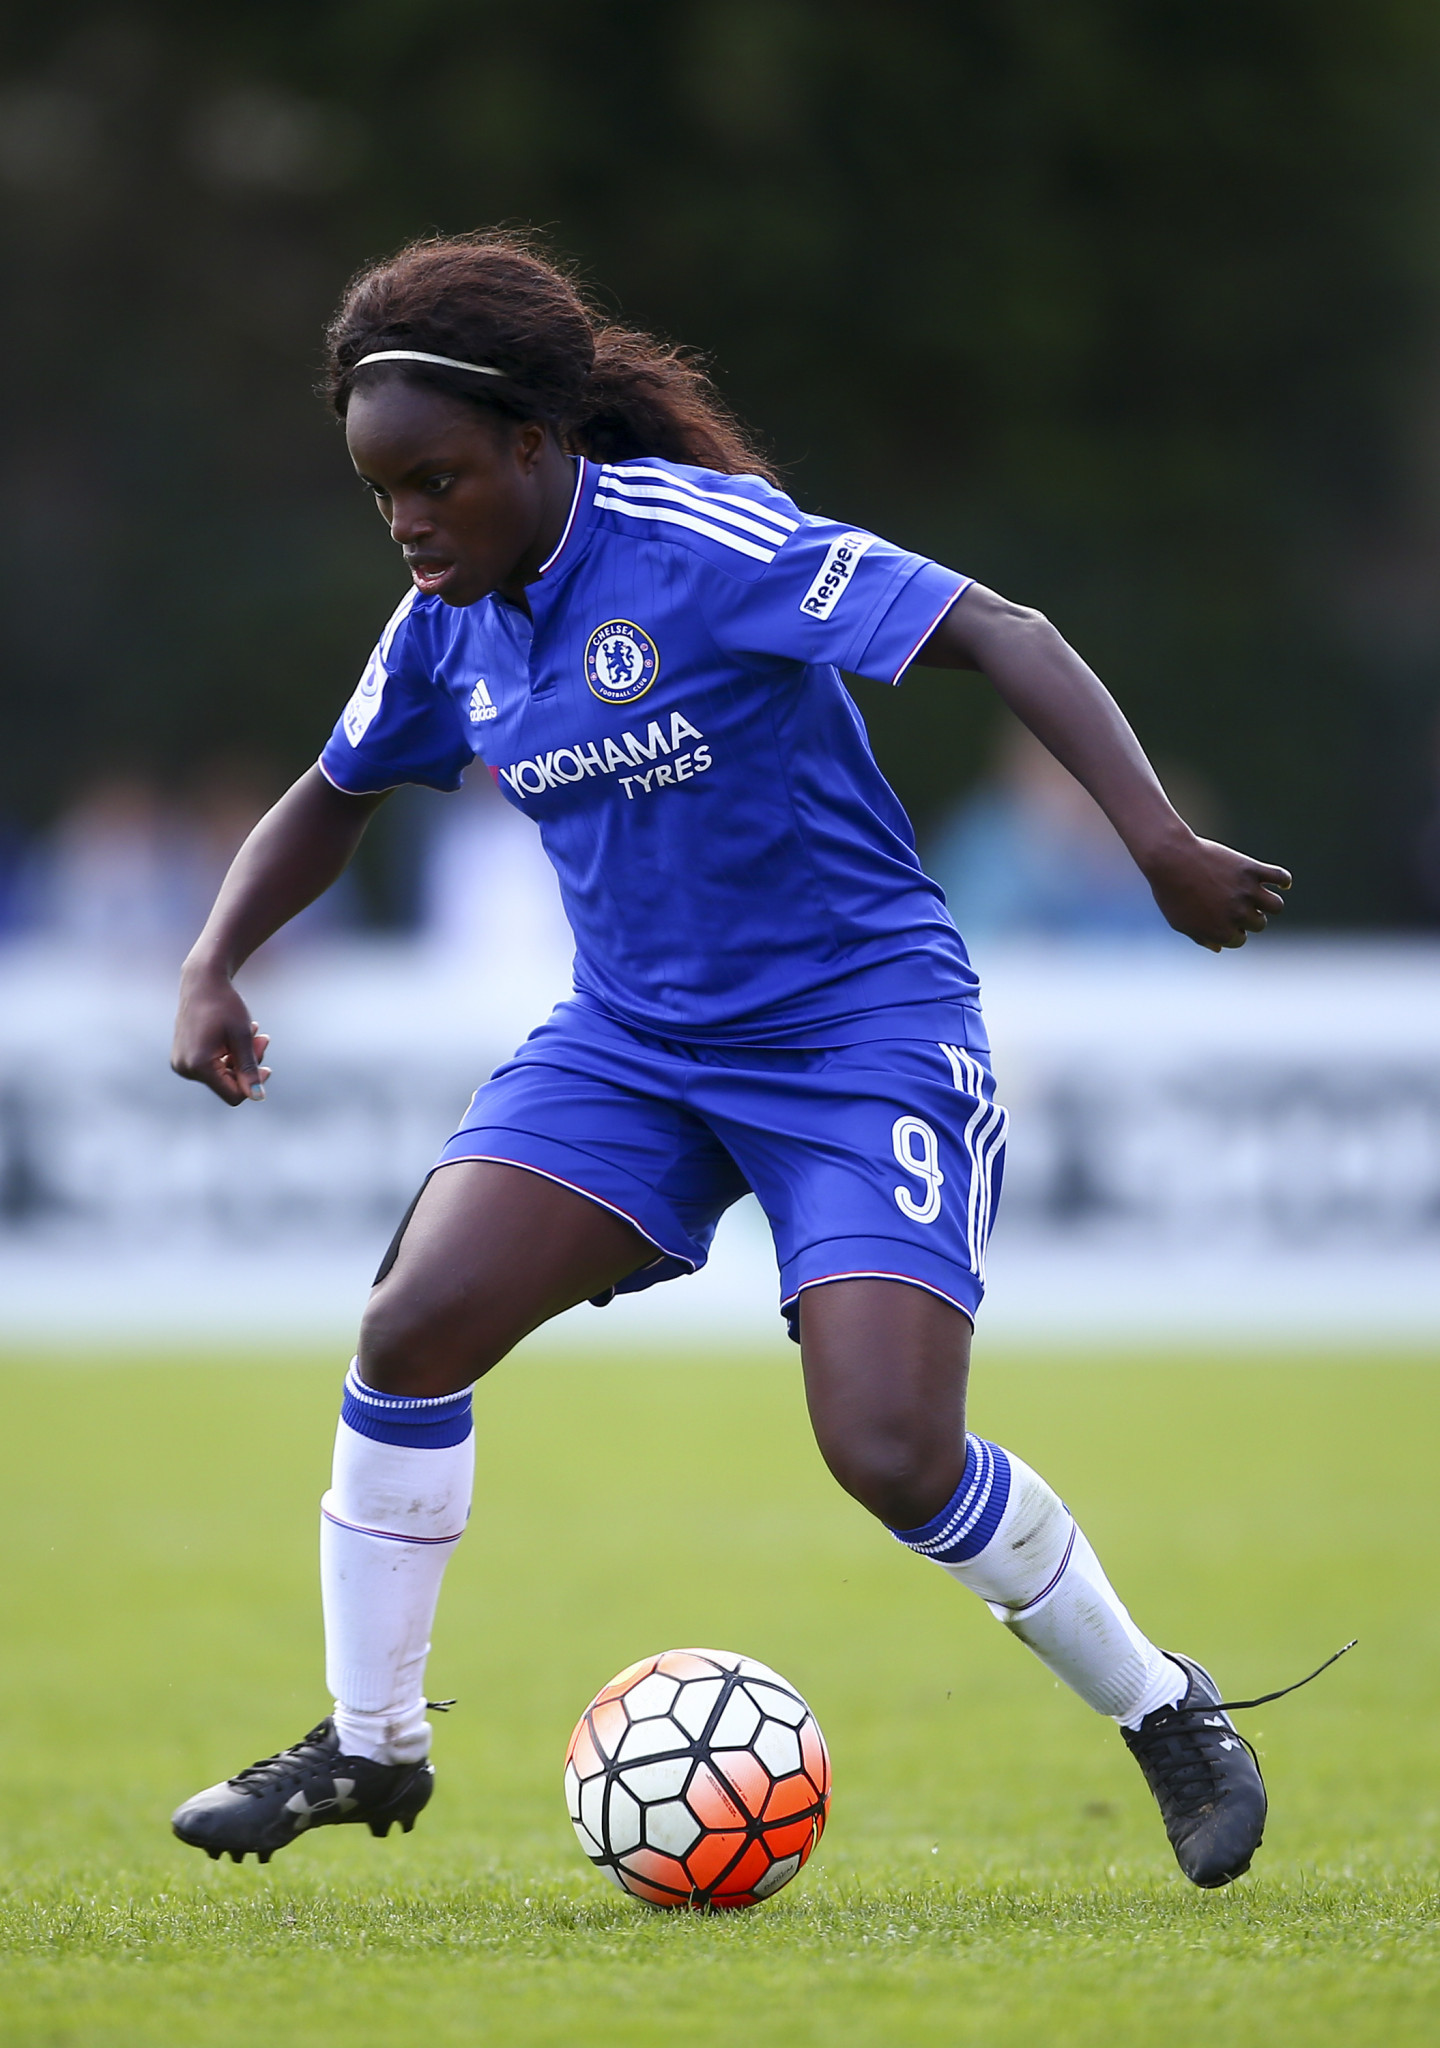 The FA has paid out the £40,000 withheld from Eniola Aluko following the dispute about the tweet she sent about former England women's manager Mark Sampson ©Getty Images